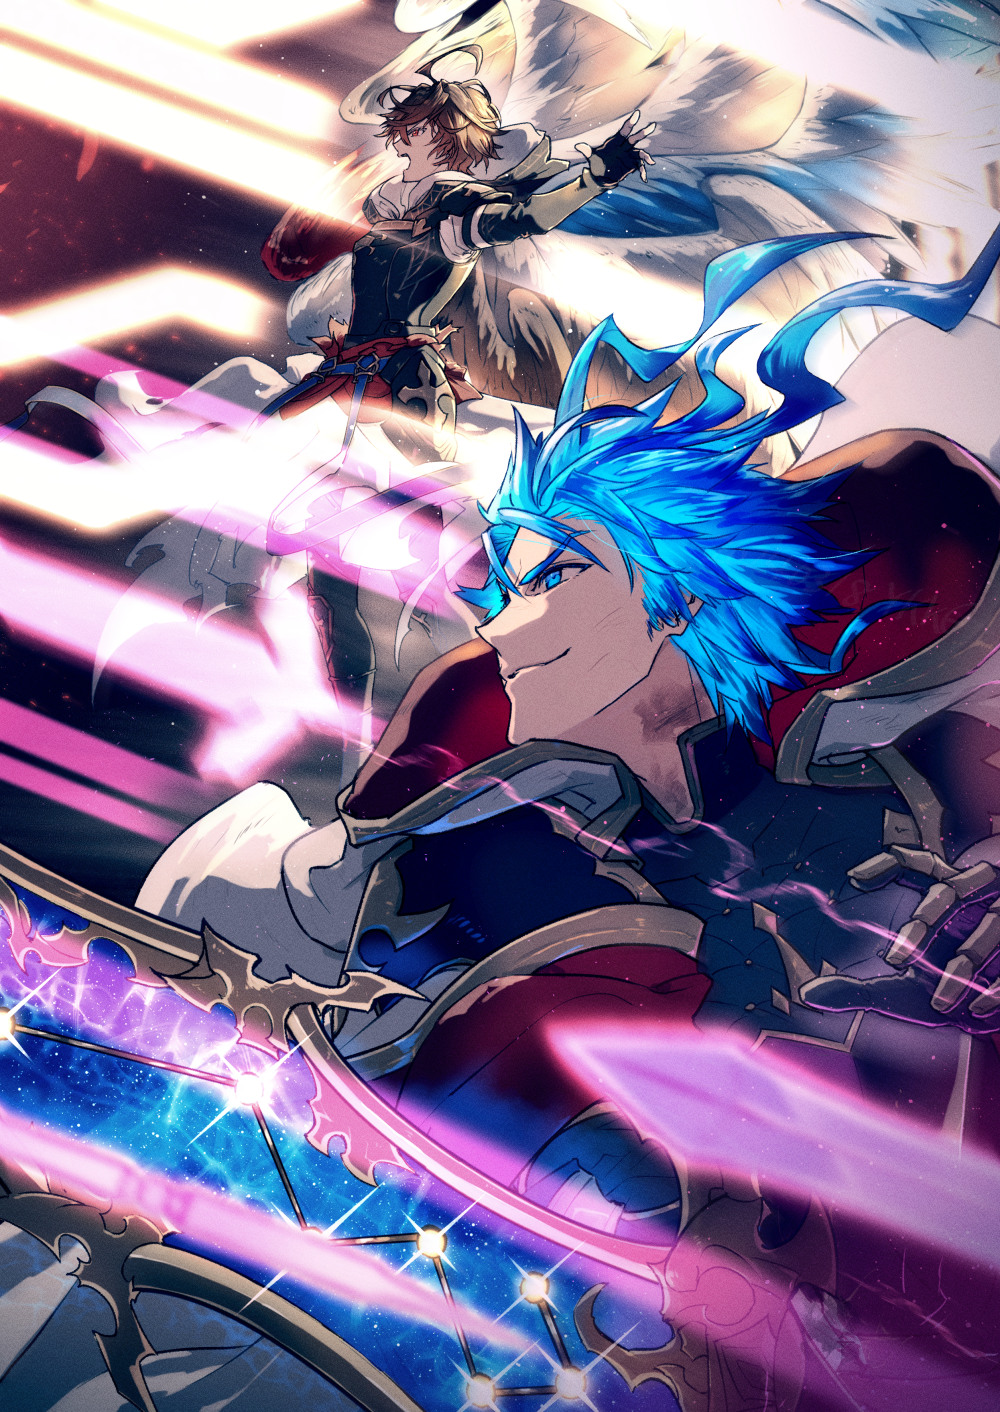 2boys ahoge alternate_hair_color armor bishounen blue_eyes blue_hair blue_wings breastplate brown_hair bruise cape commentary commentary_request fighting fingerless_gloves from_side furrowed_brow gauntlets gloves granblue_fantasy hair_between_eyes highres hood hood_down injury jacket light male_focus messy_hair multiple_boys outstretched_arms parted_bangs red_eyes red_wings sandalphon_(granblue_fantasy) seofon_(granblue_fantasy) short_hair smile spiked_hair spoilers star_(sky) turtleneck waldtrad white_cape white_jacket white_wings wings